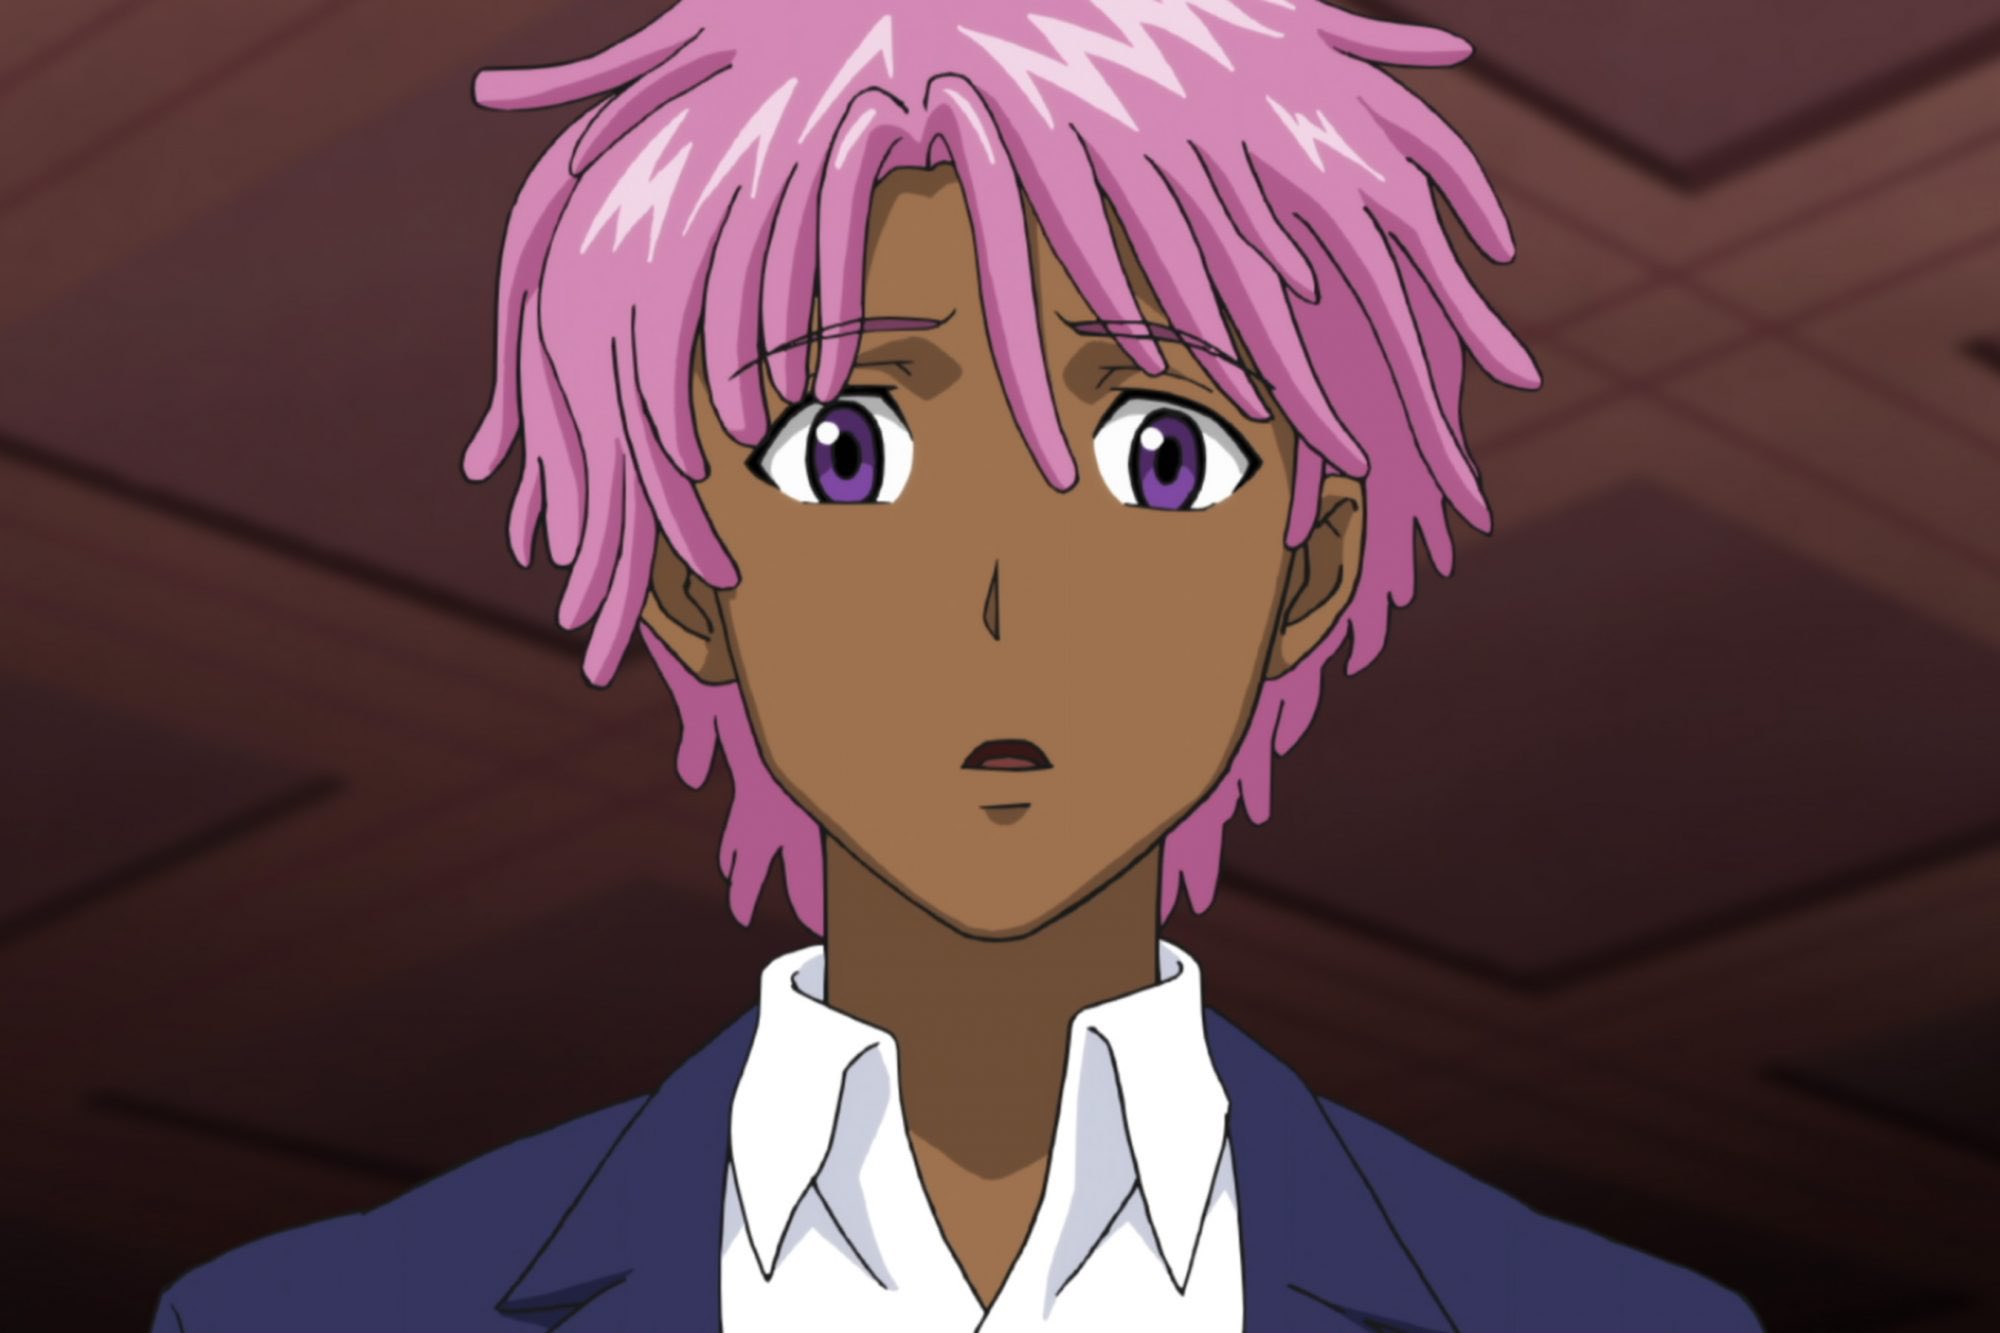 AI Image Generator Anime boy with light pink fluffy hair and large green  eyes smiling and blushing